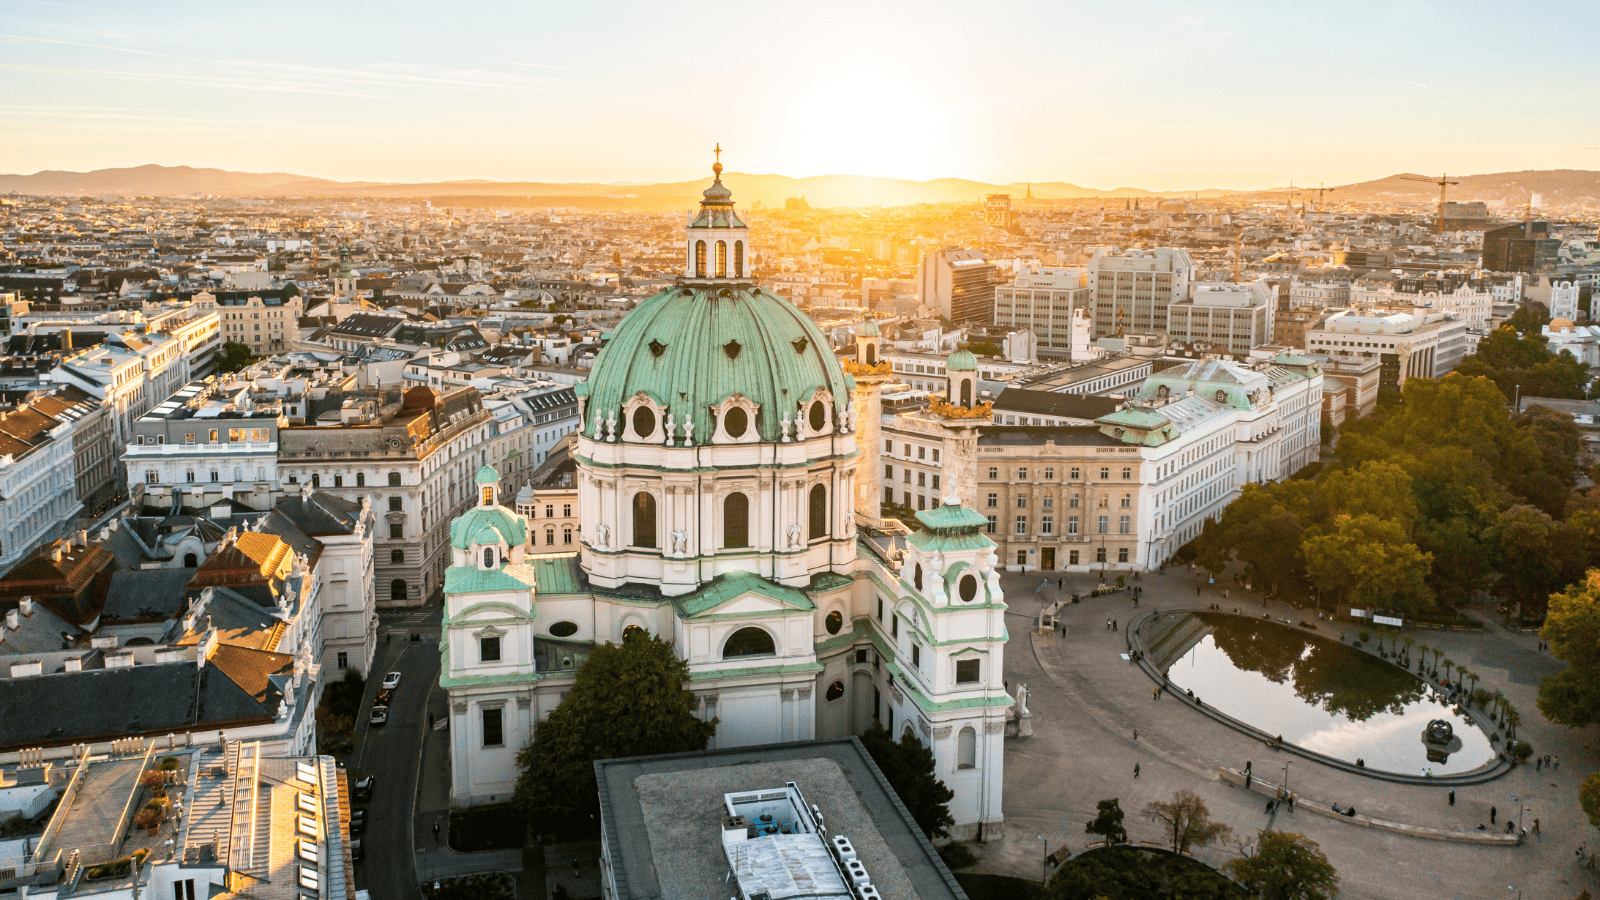 <p>Disabled tourists should plan a trip to Austria’s capital, Vienna. It’s a prime example of creating equal access for visitors of all abilities.</p><p>Compared to other European destinations, Vienna is highly accommodating to those with mobility concerns. The city’s pedestrian areas are flat and smooth, and most trams, trains, and buses allow step-free boarding.</p>